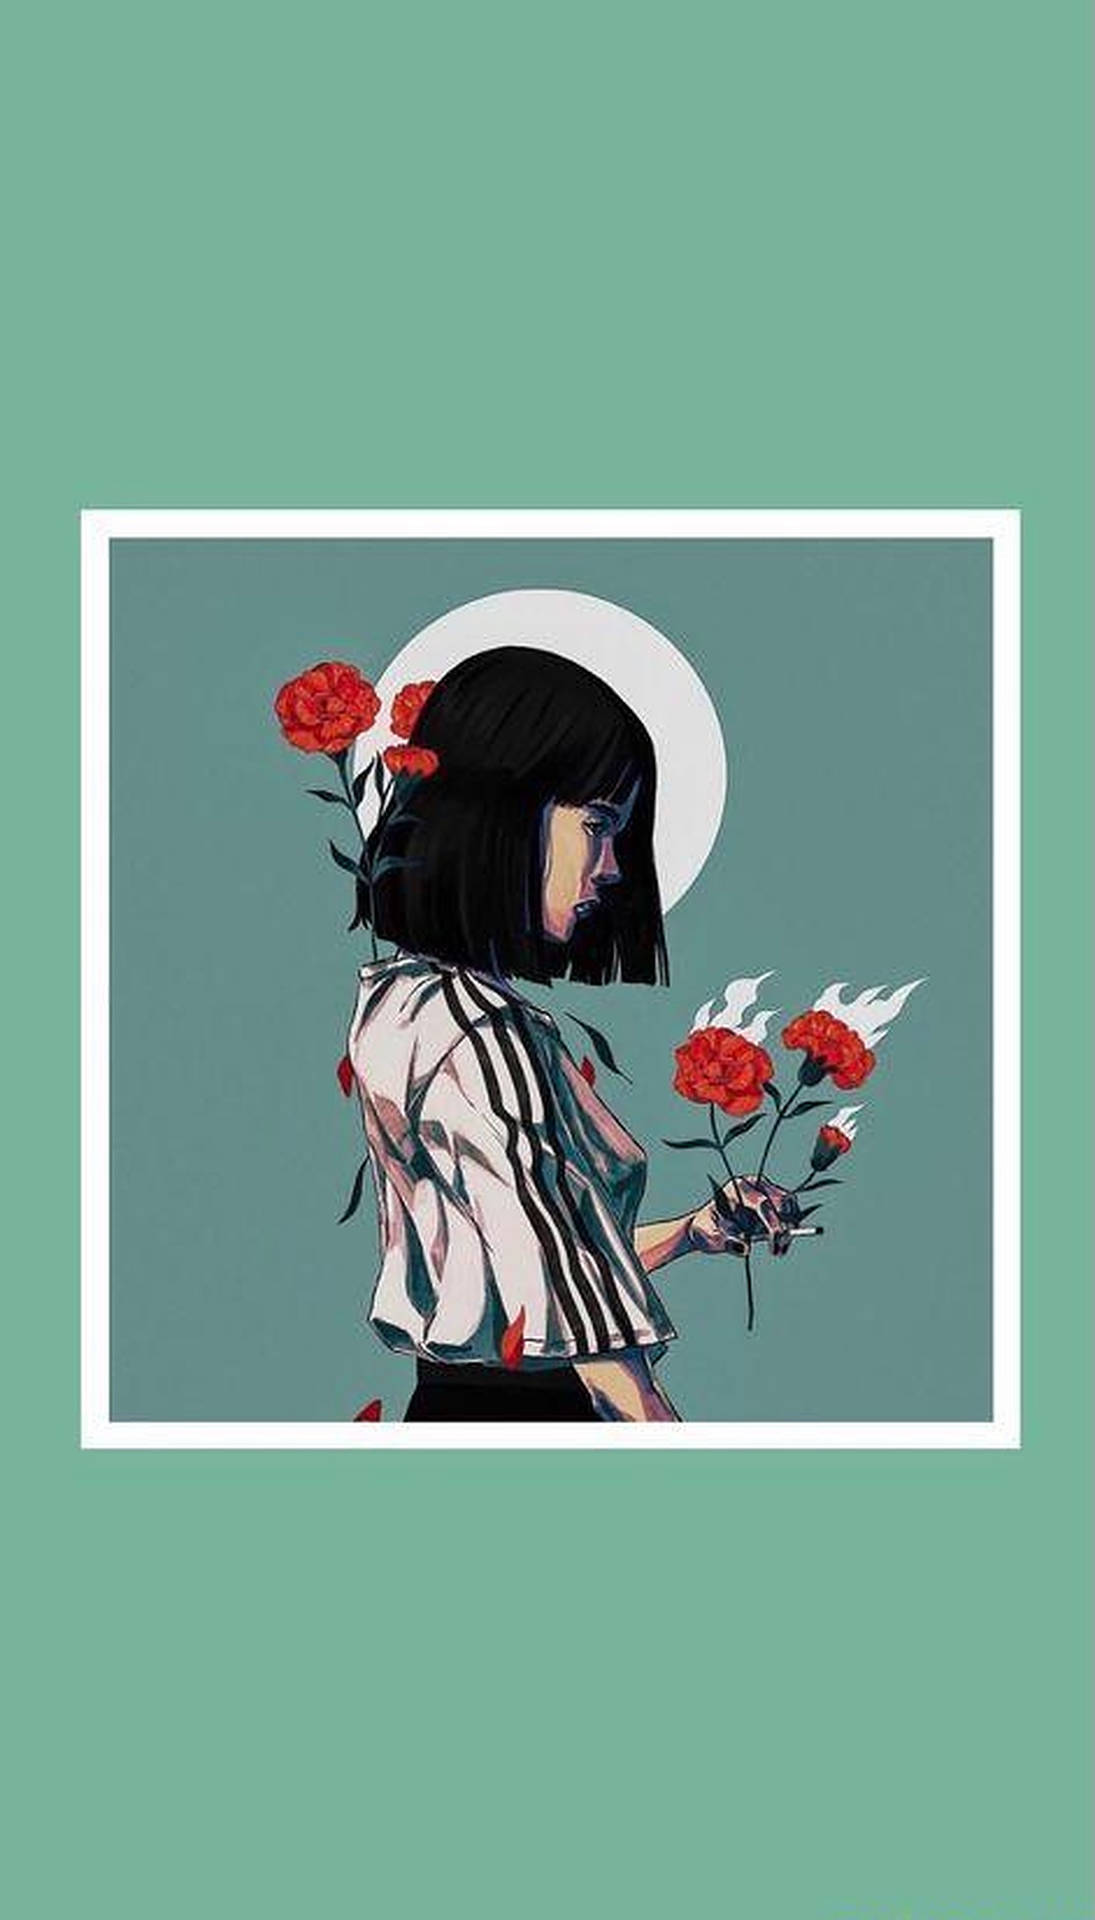 Aesthetic Girl With Roses Background